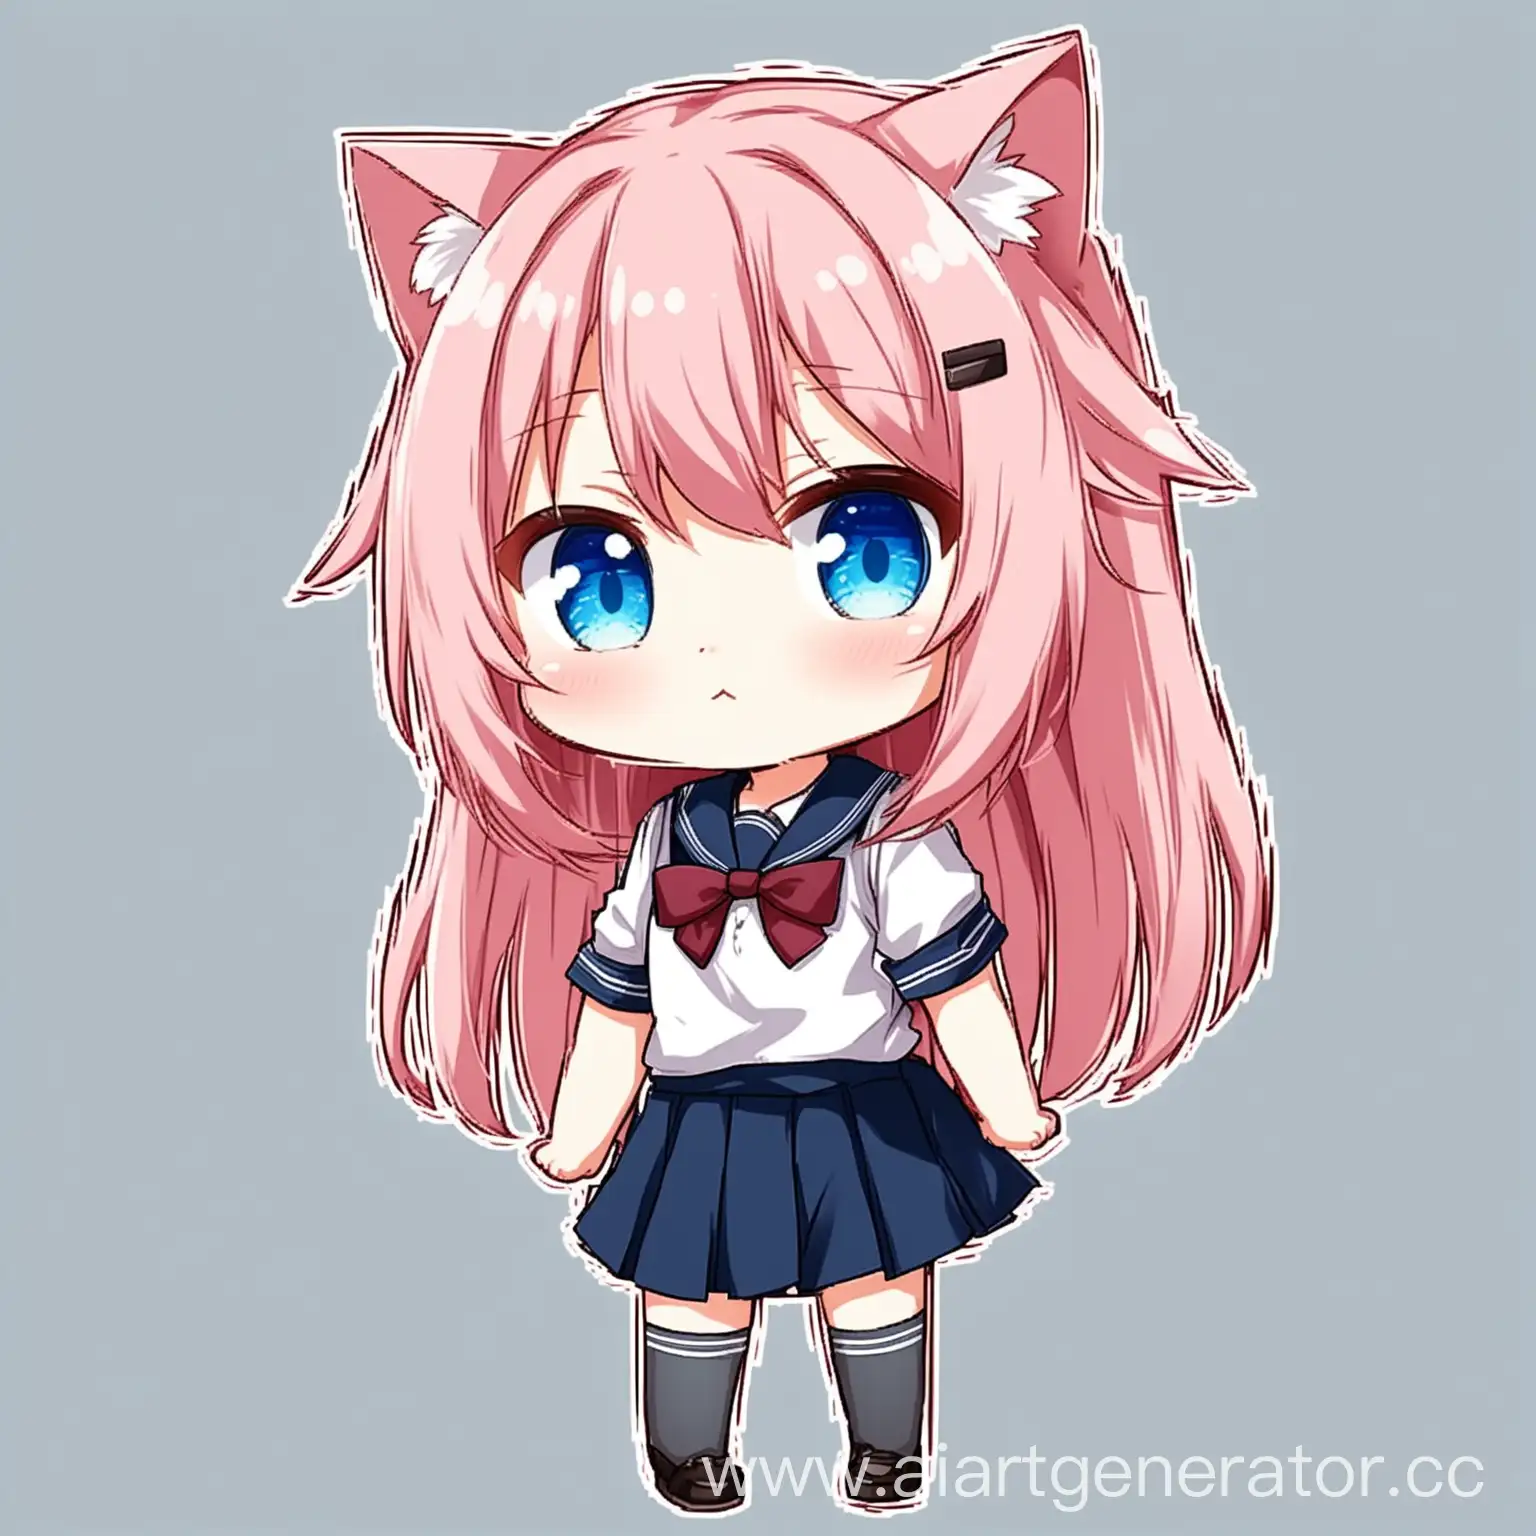 Chibi-Anime-Cat-Girl-with-Pink-Hair-and-Blue-Eyes-in-School-Uniform